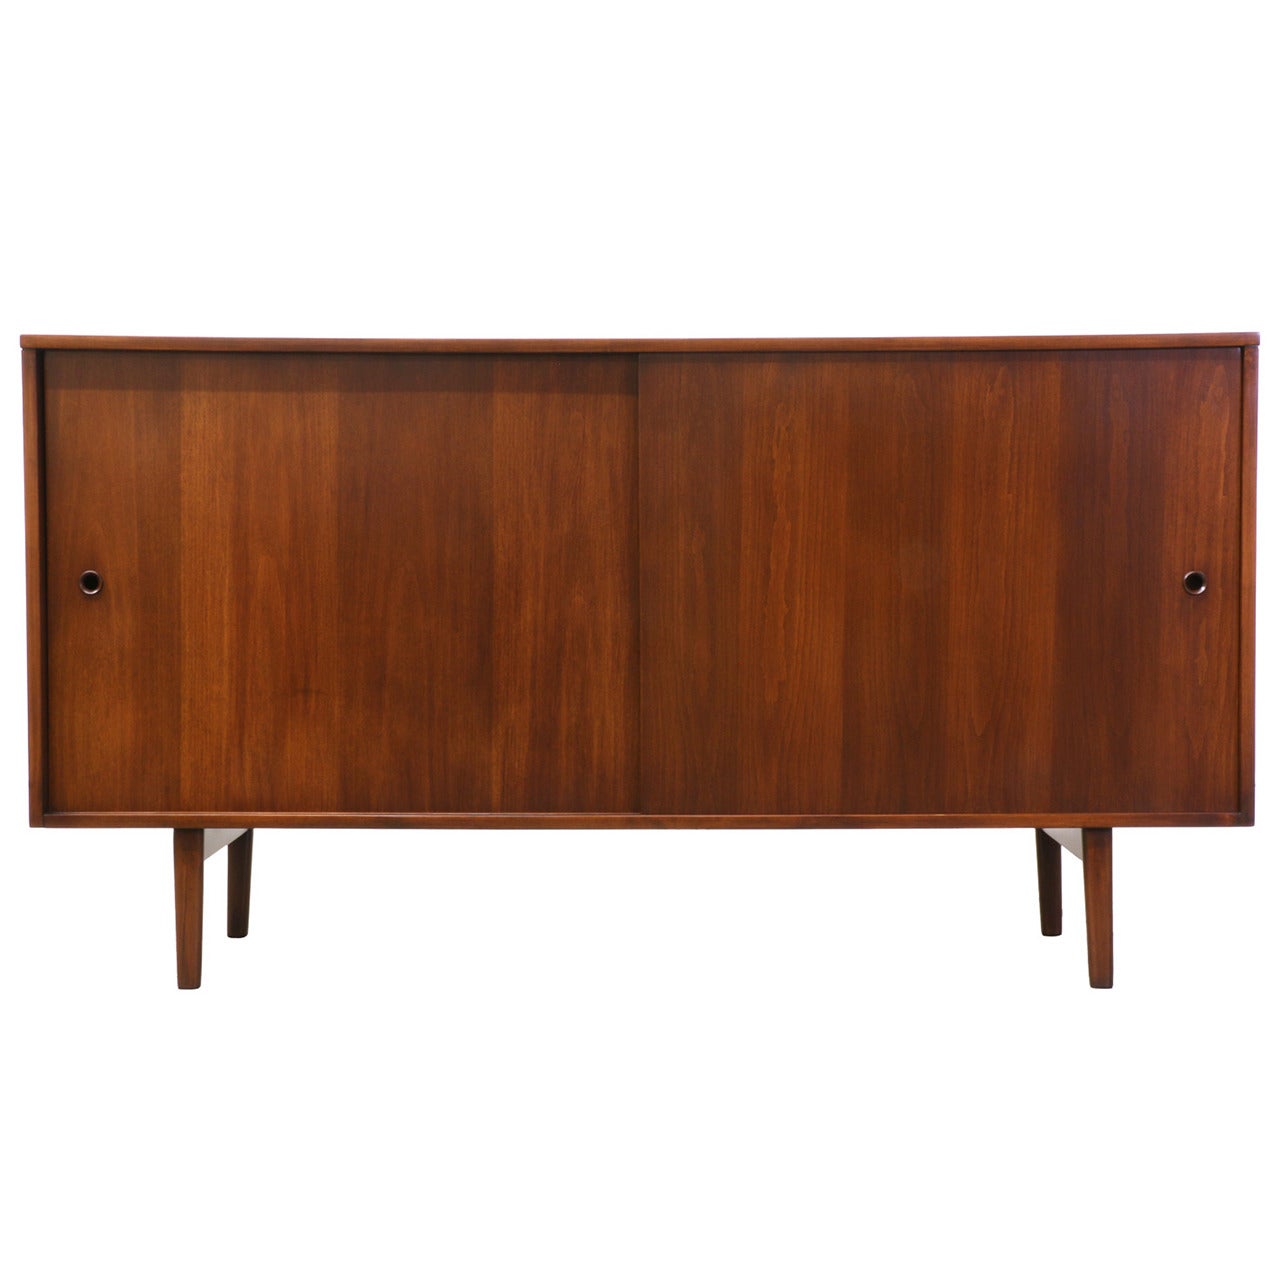 Paul McCobb “Planner Group” Credenza for Winchendon Furniture